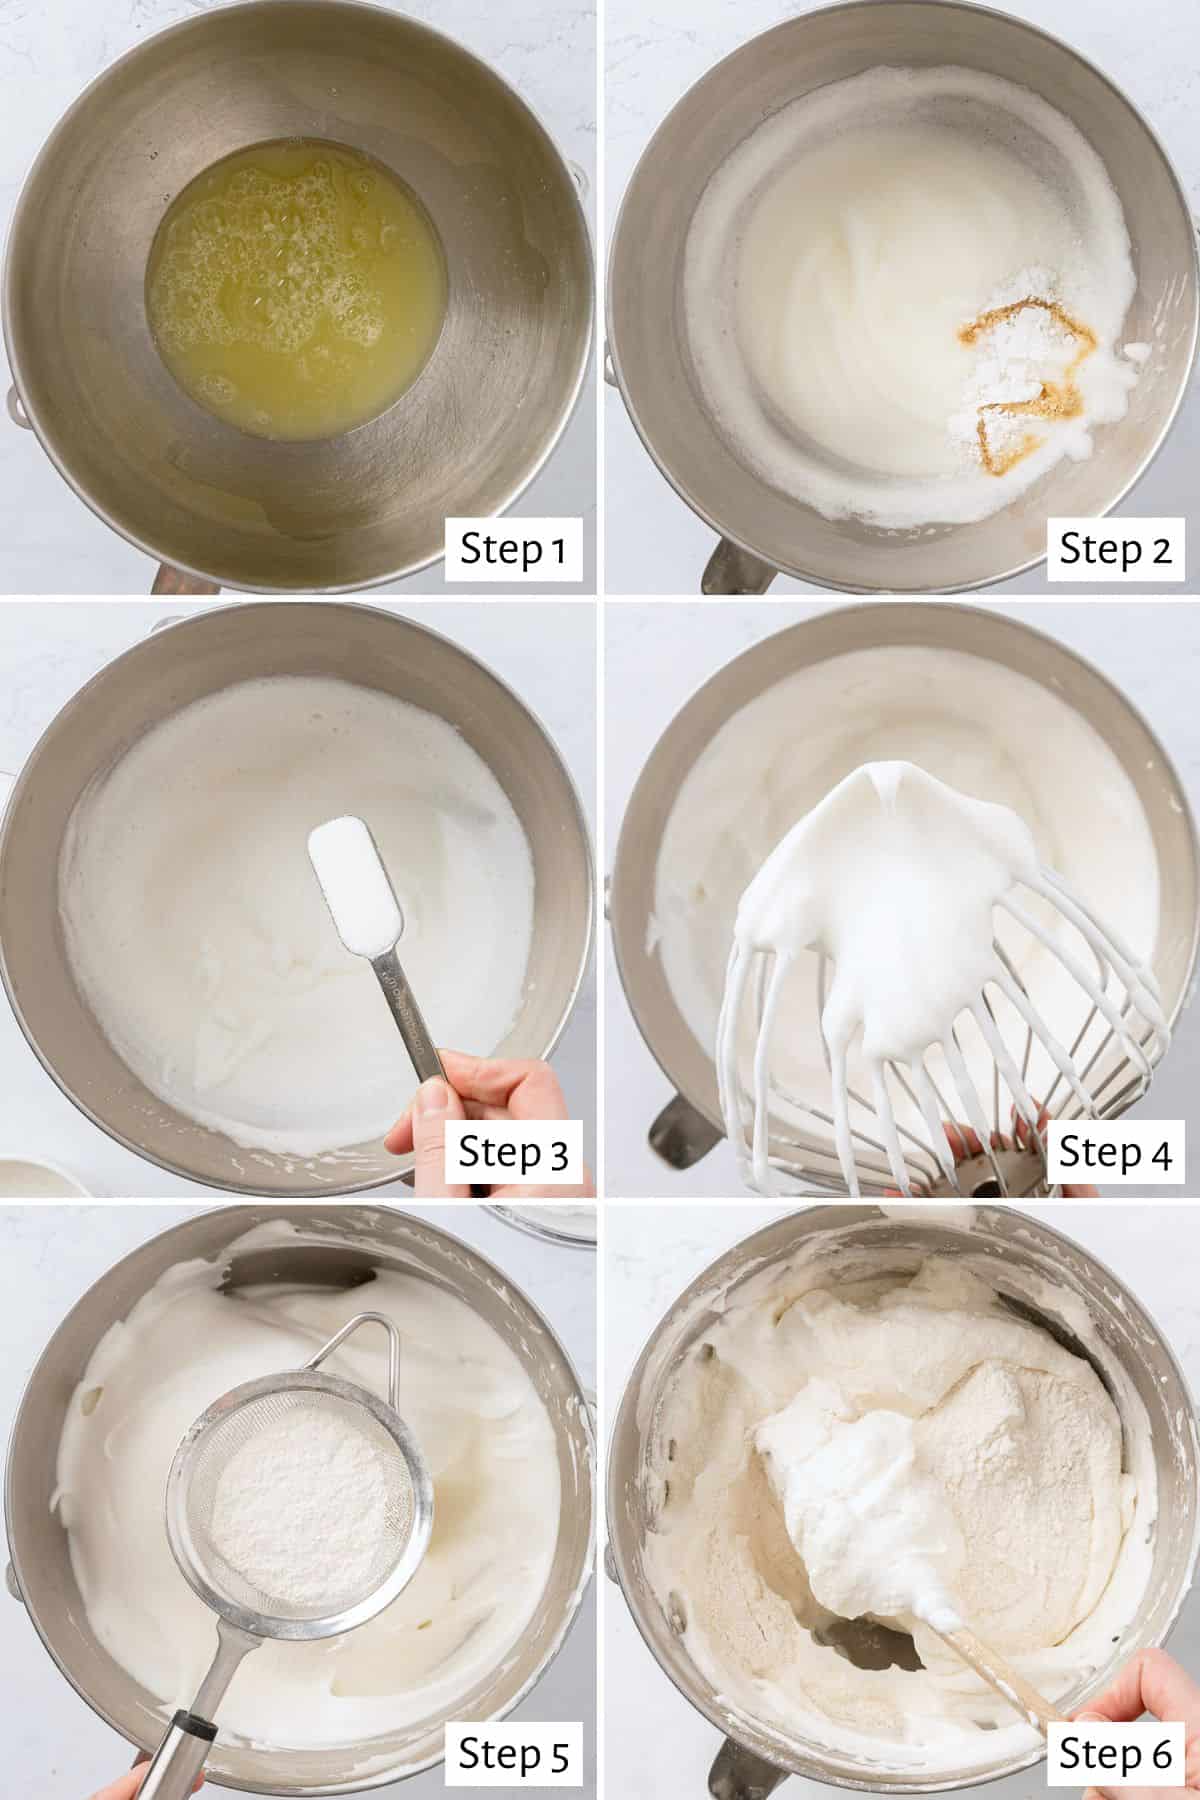 6 image collage making recipe the bowl of a stand mixer: 1- egg whites in the bowl, 2- after beating until frothy with cream of tartar and vanilla added, 3- sugar being added, 4- whisk with stiff, glossy peaks on it, 5- sifter over egg whites, sifting in flour mixture, 6- folding flour and egg whites together.